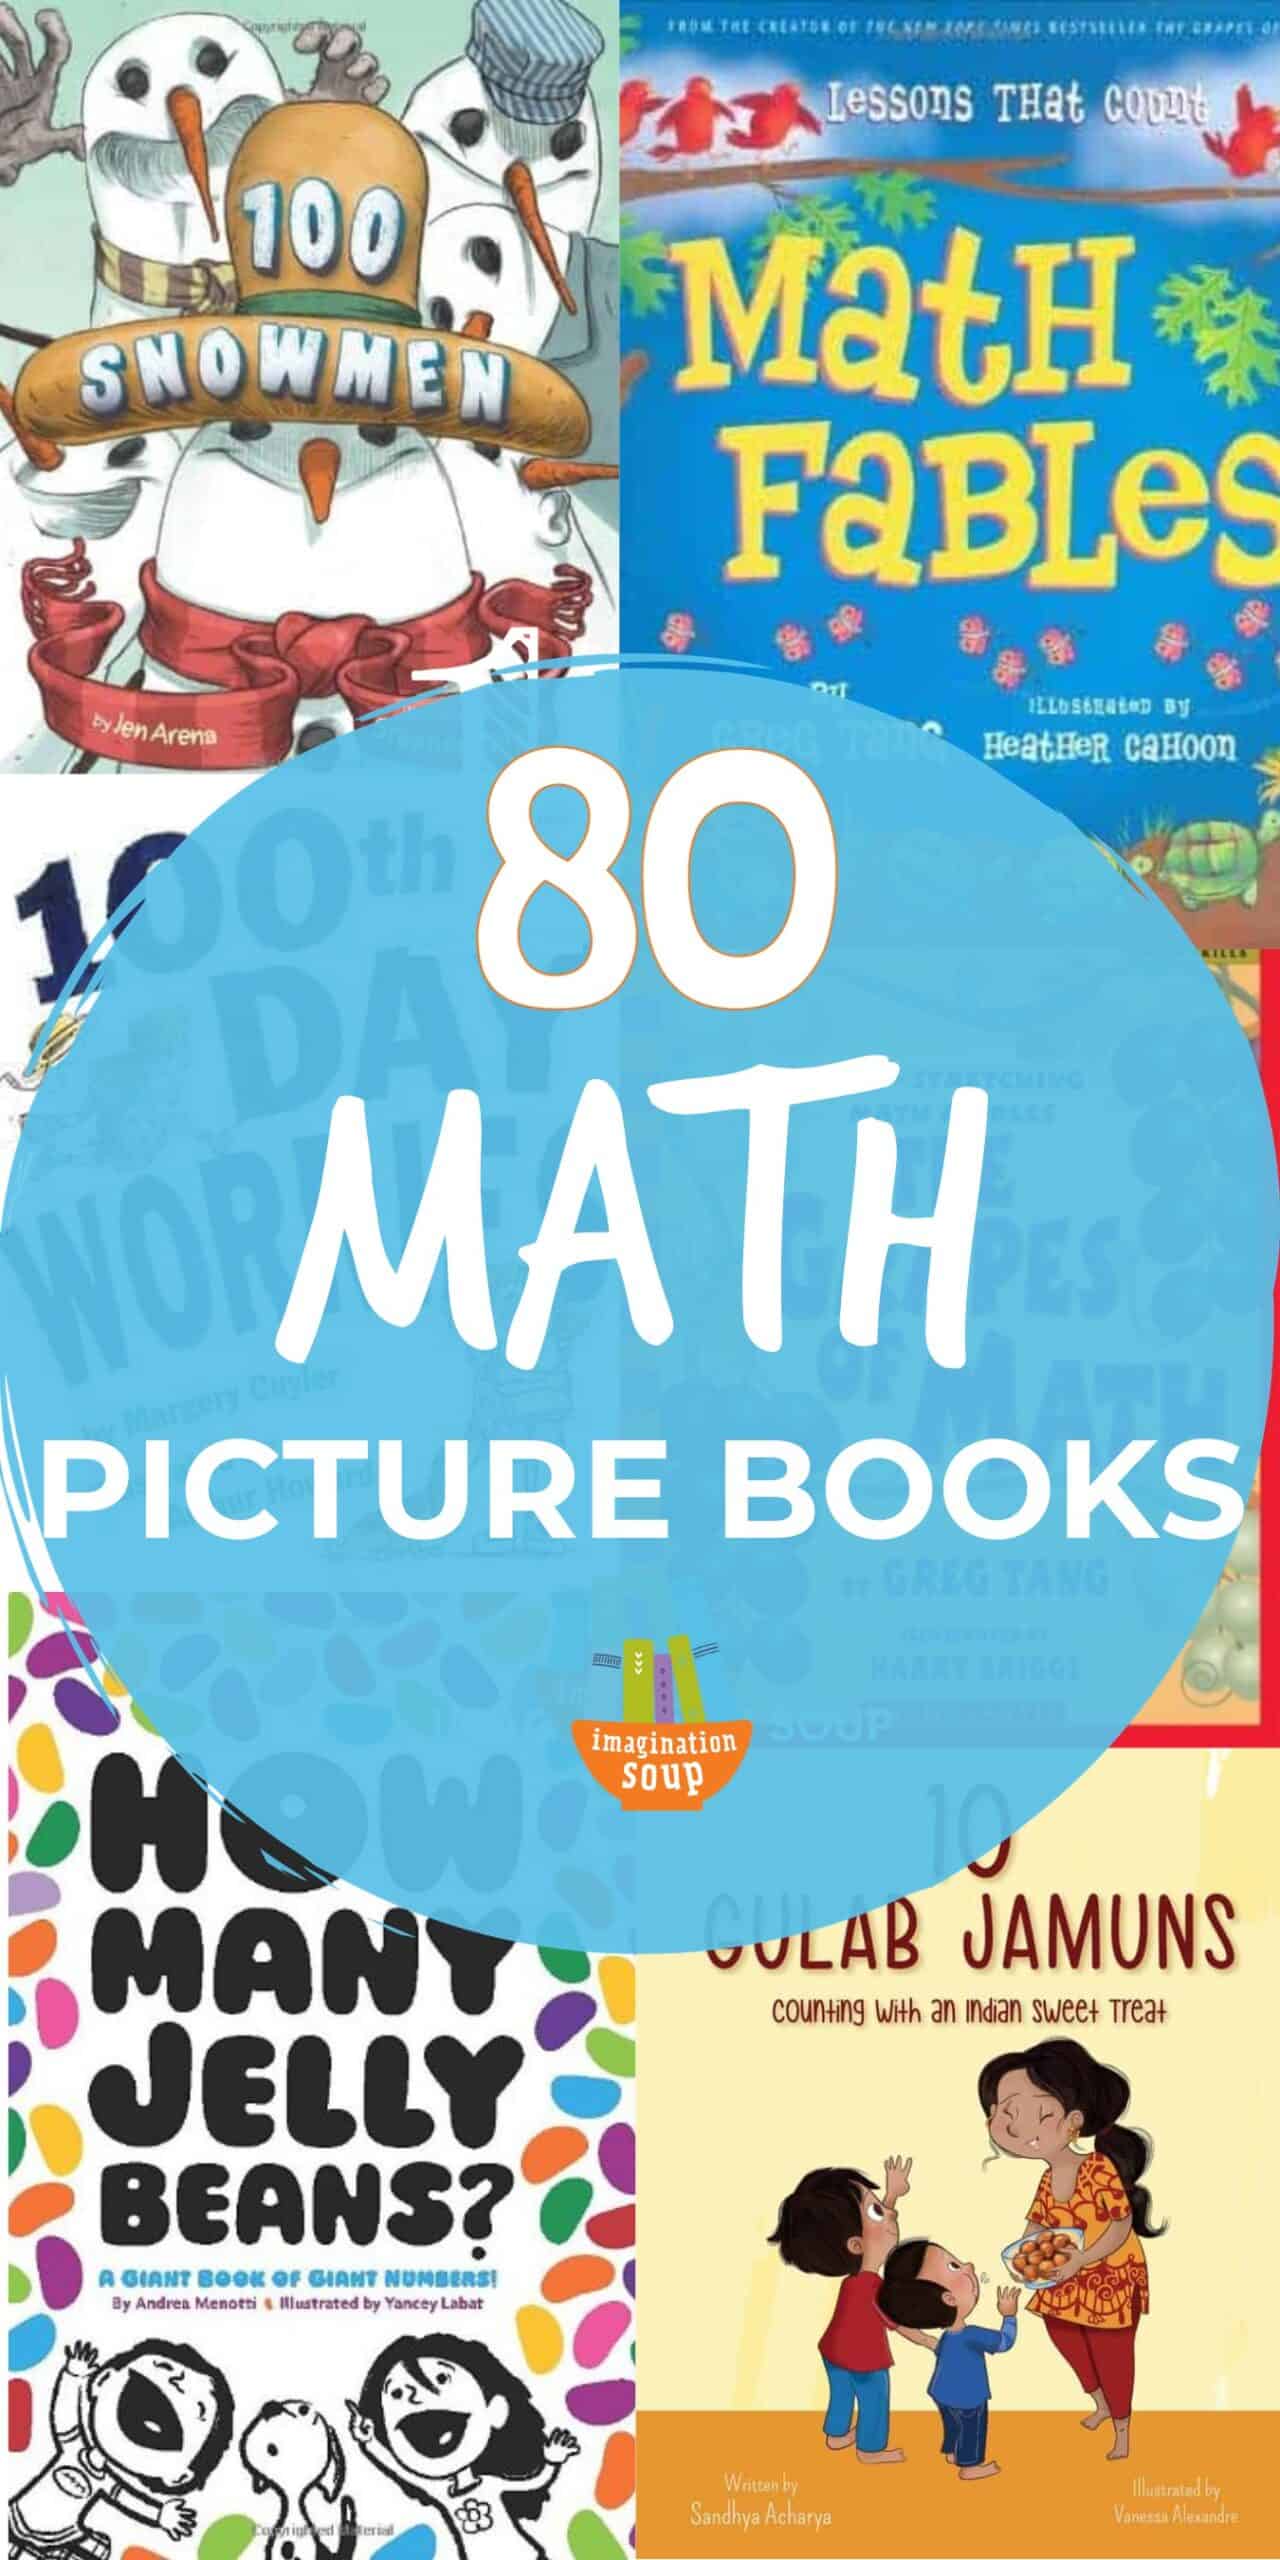 80 math picture books for children -- great for homeschool, school, teachers, and parents